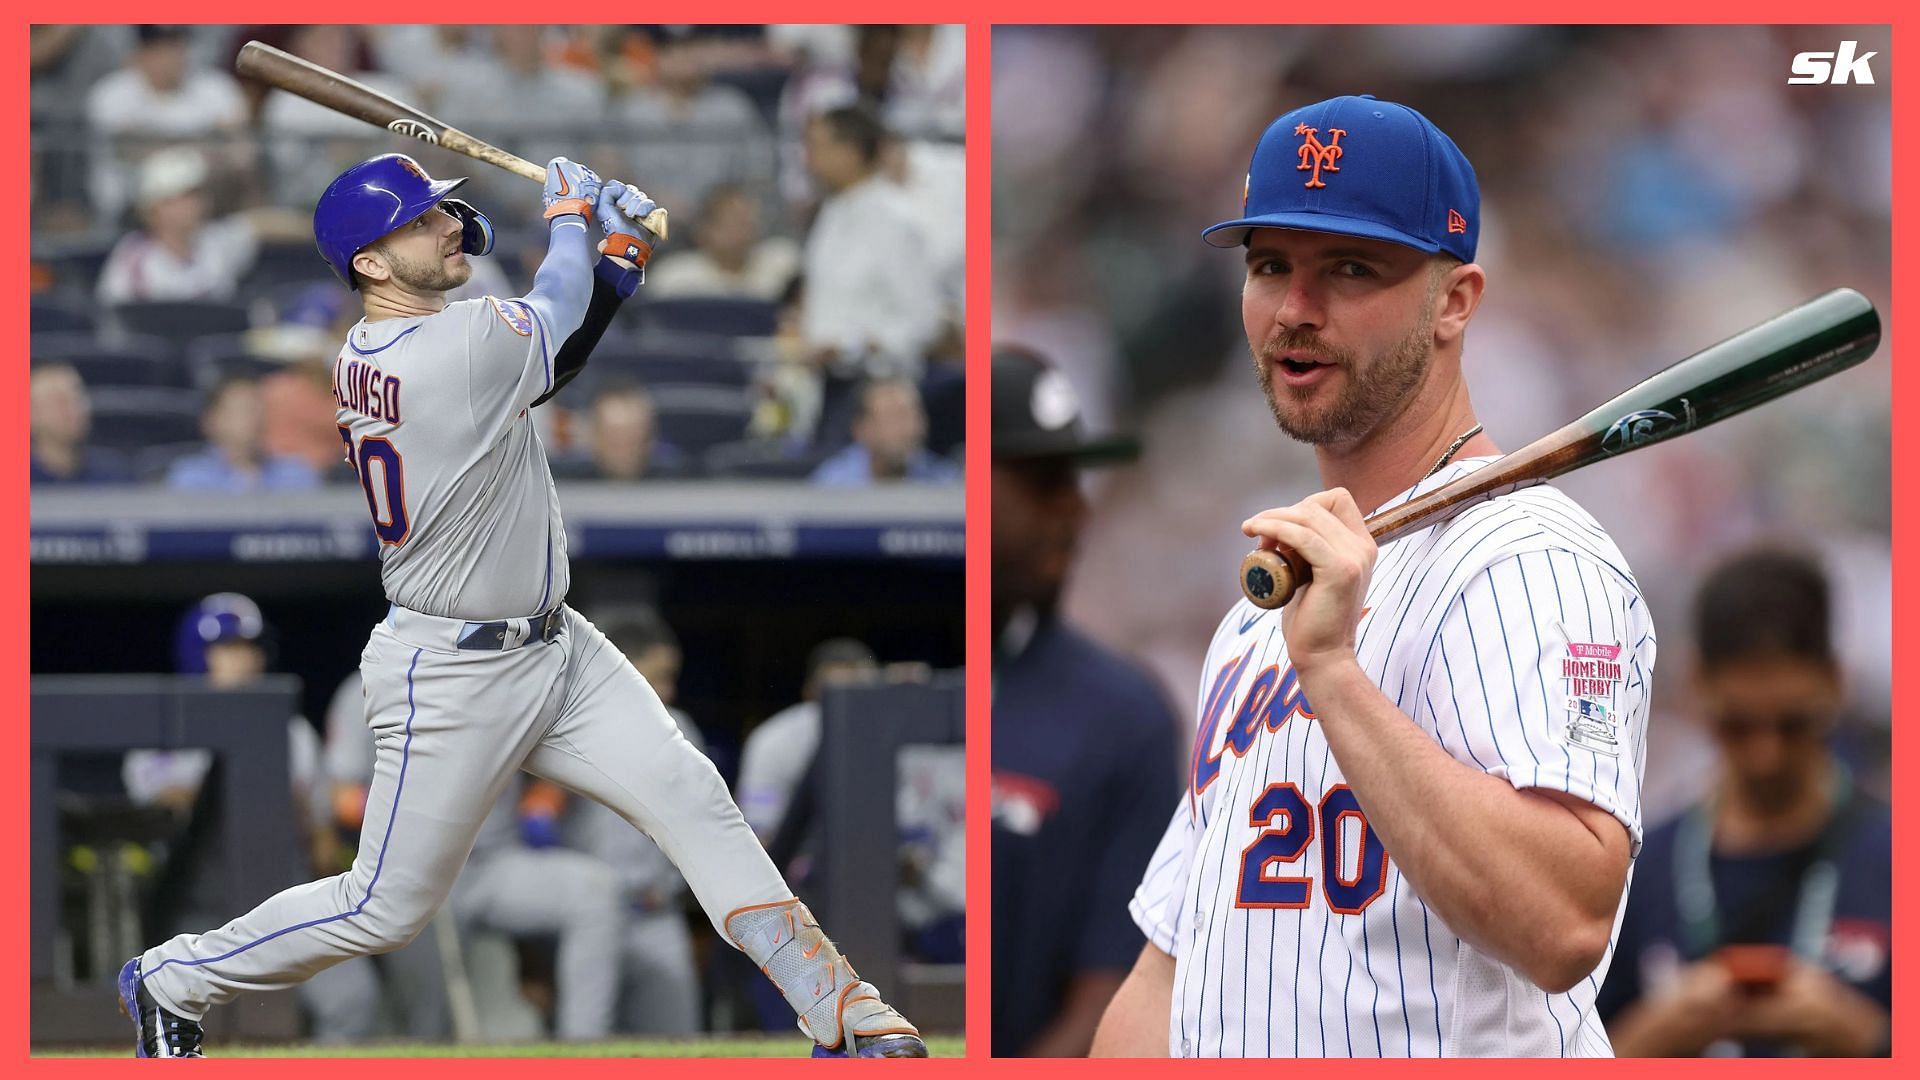 Pete Alonso crushed two home runs in the game against the New York Yankees.